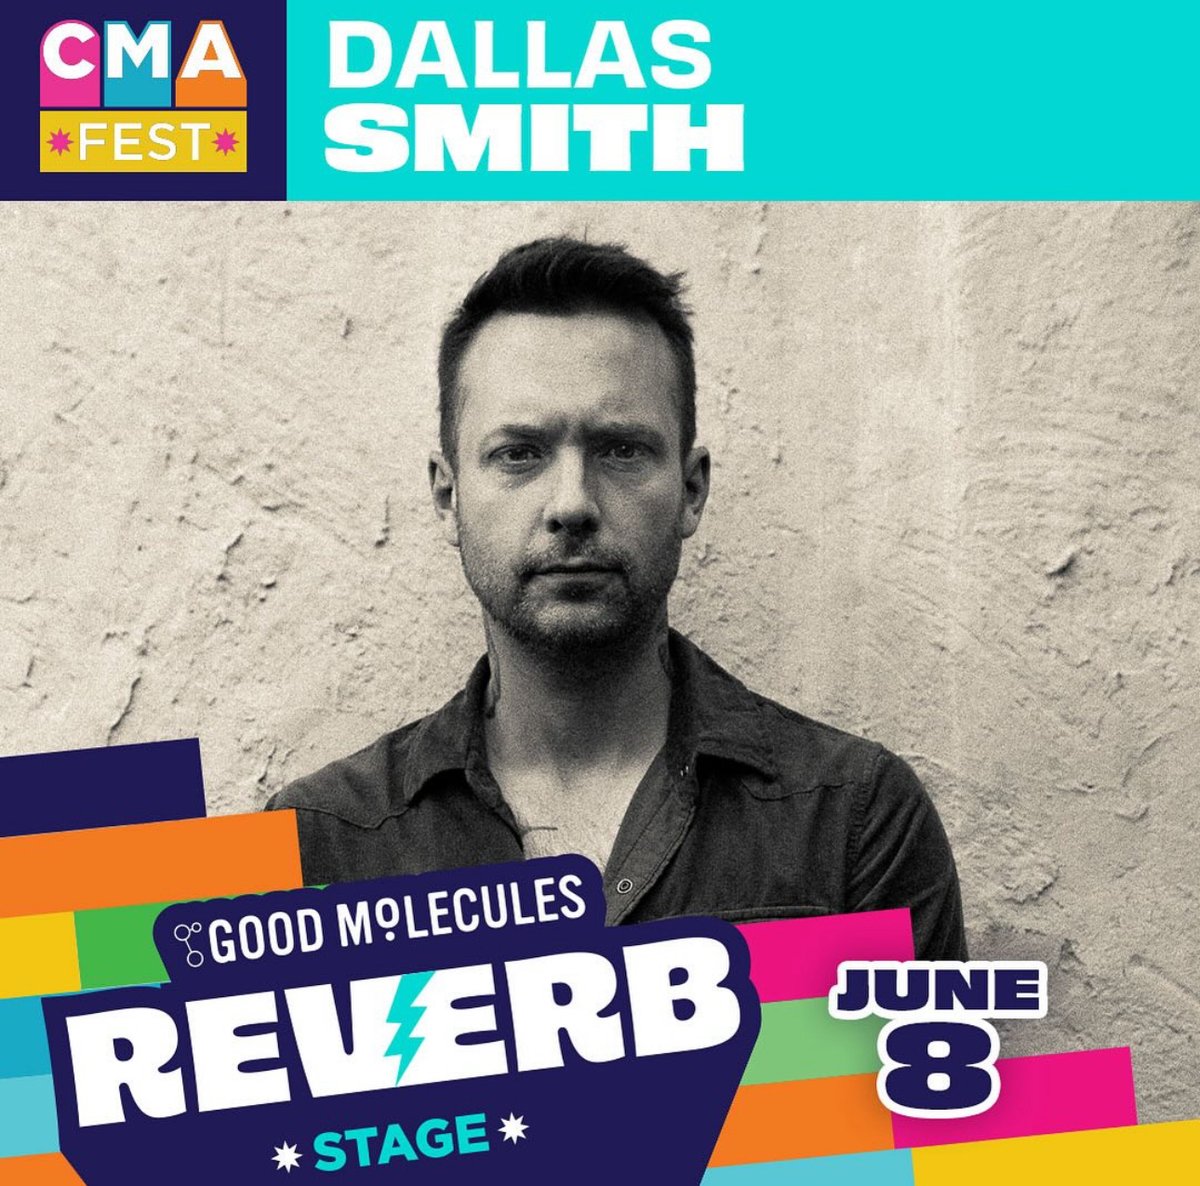 I’m excited to be performing at #CMAfest this year on the Good Molecules Reverb Stage! If you’ll be in Nashville, come out and have some fun with us on June 8th🍻 cmafest.com